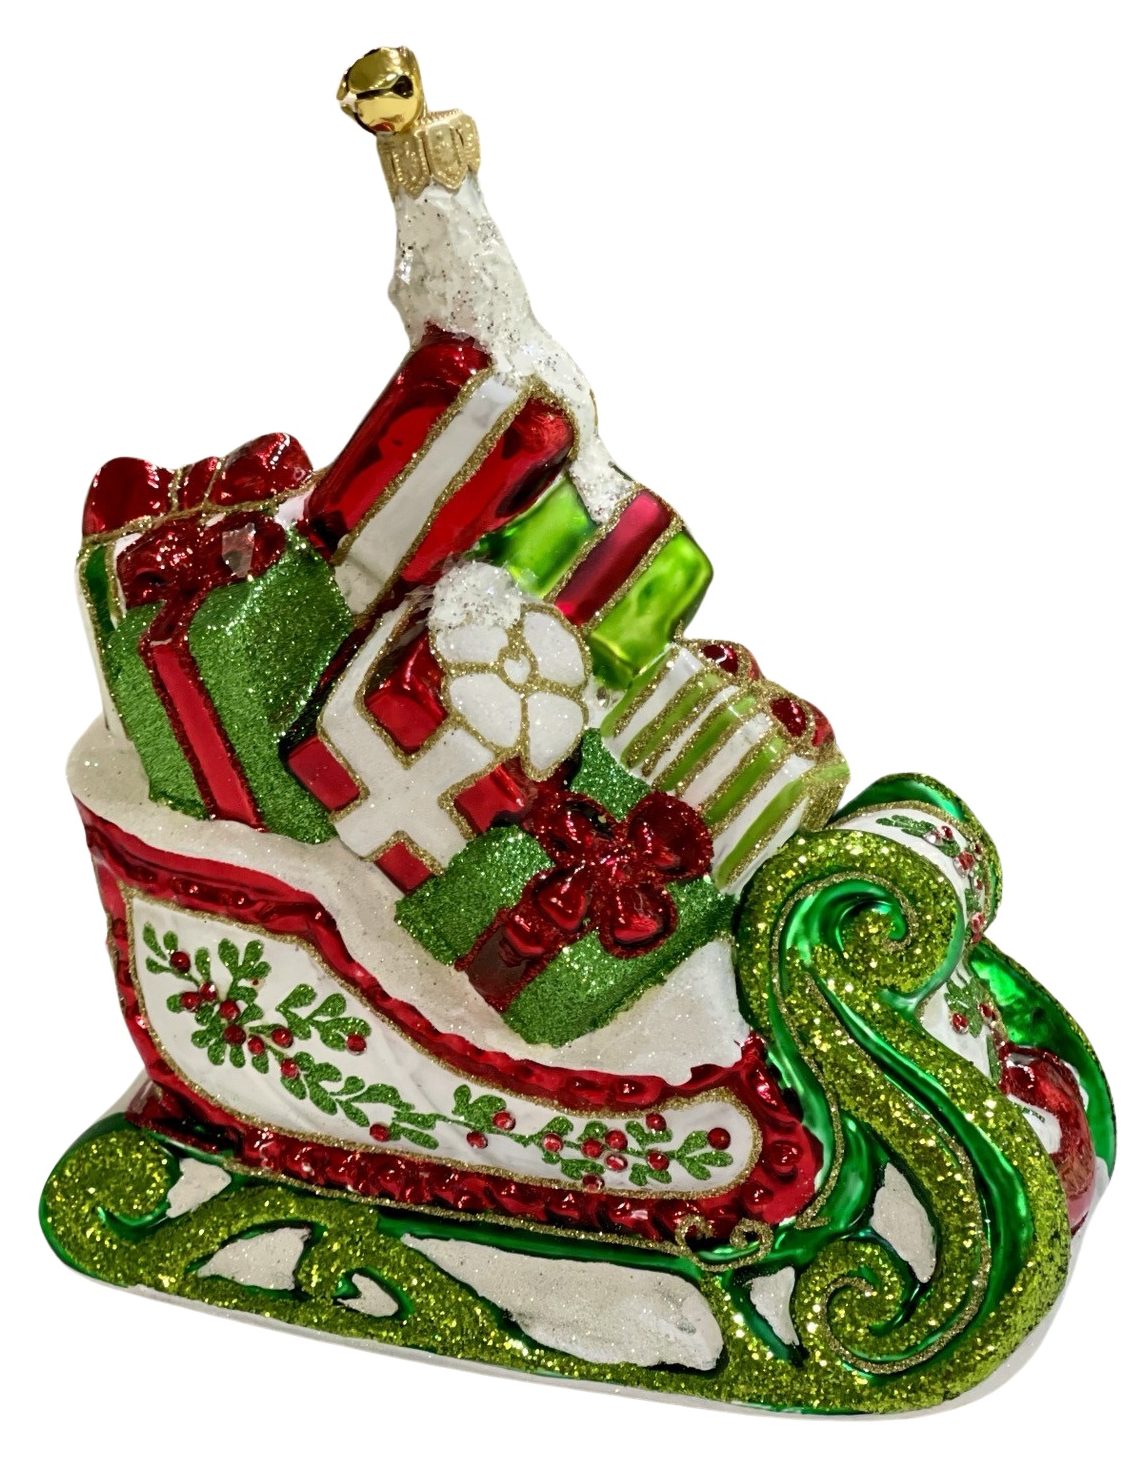 Unique Hand Painted Holly Berry Leaf Patterned Glass Santa's Sleigh with Presents Christmas Ornament Holiday Decoration